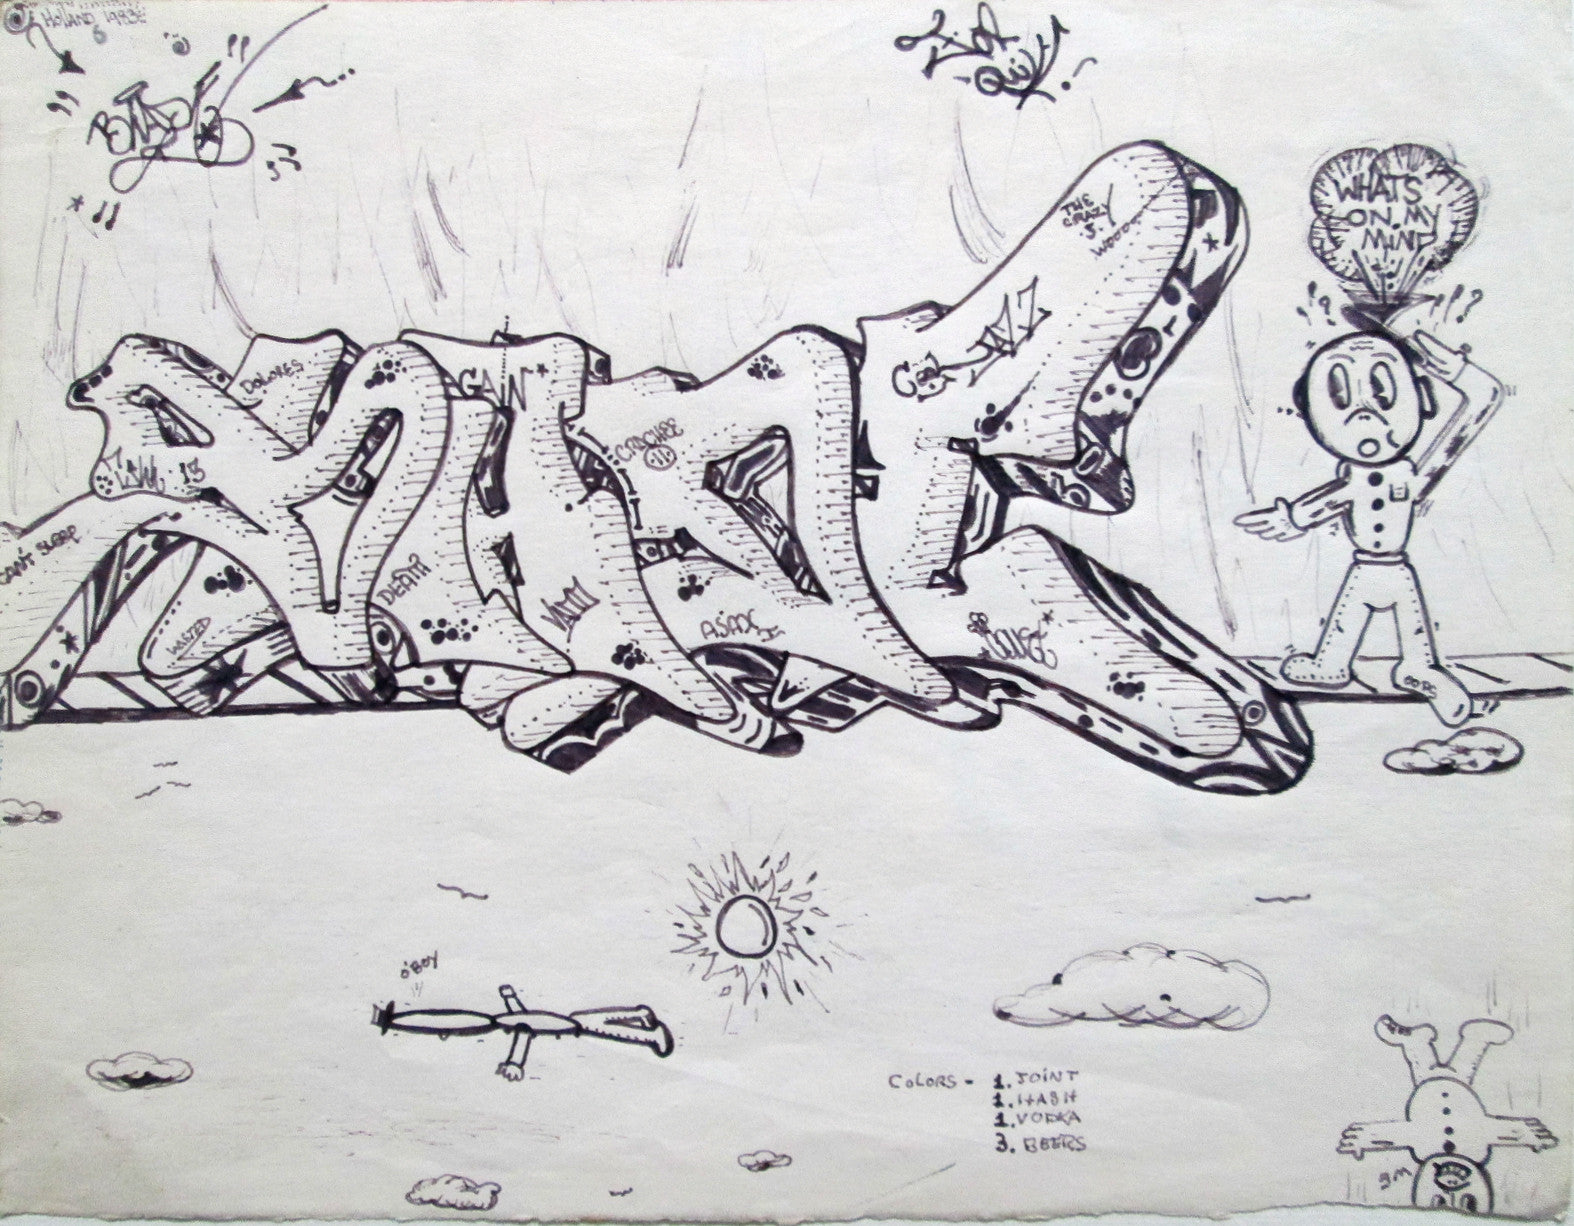 BLADE - "For QUIK" -  Drawing 1983